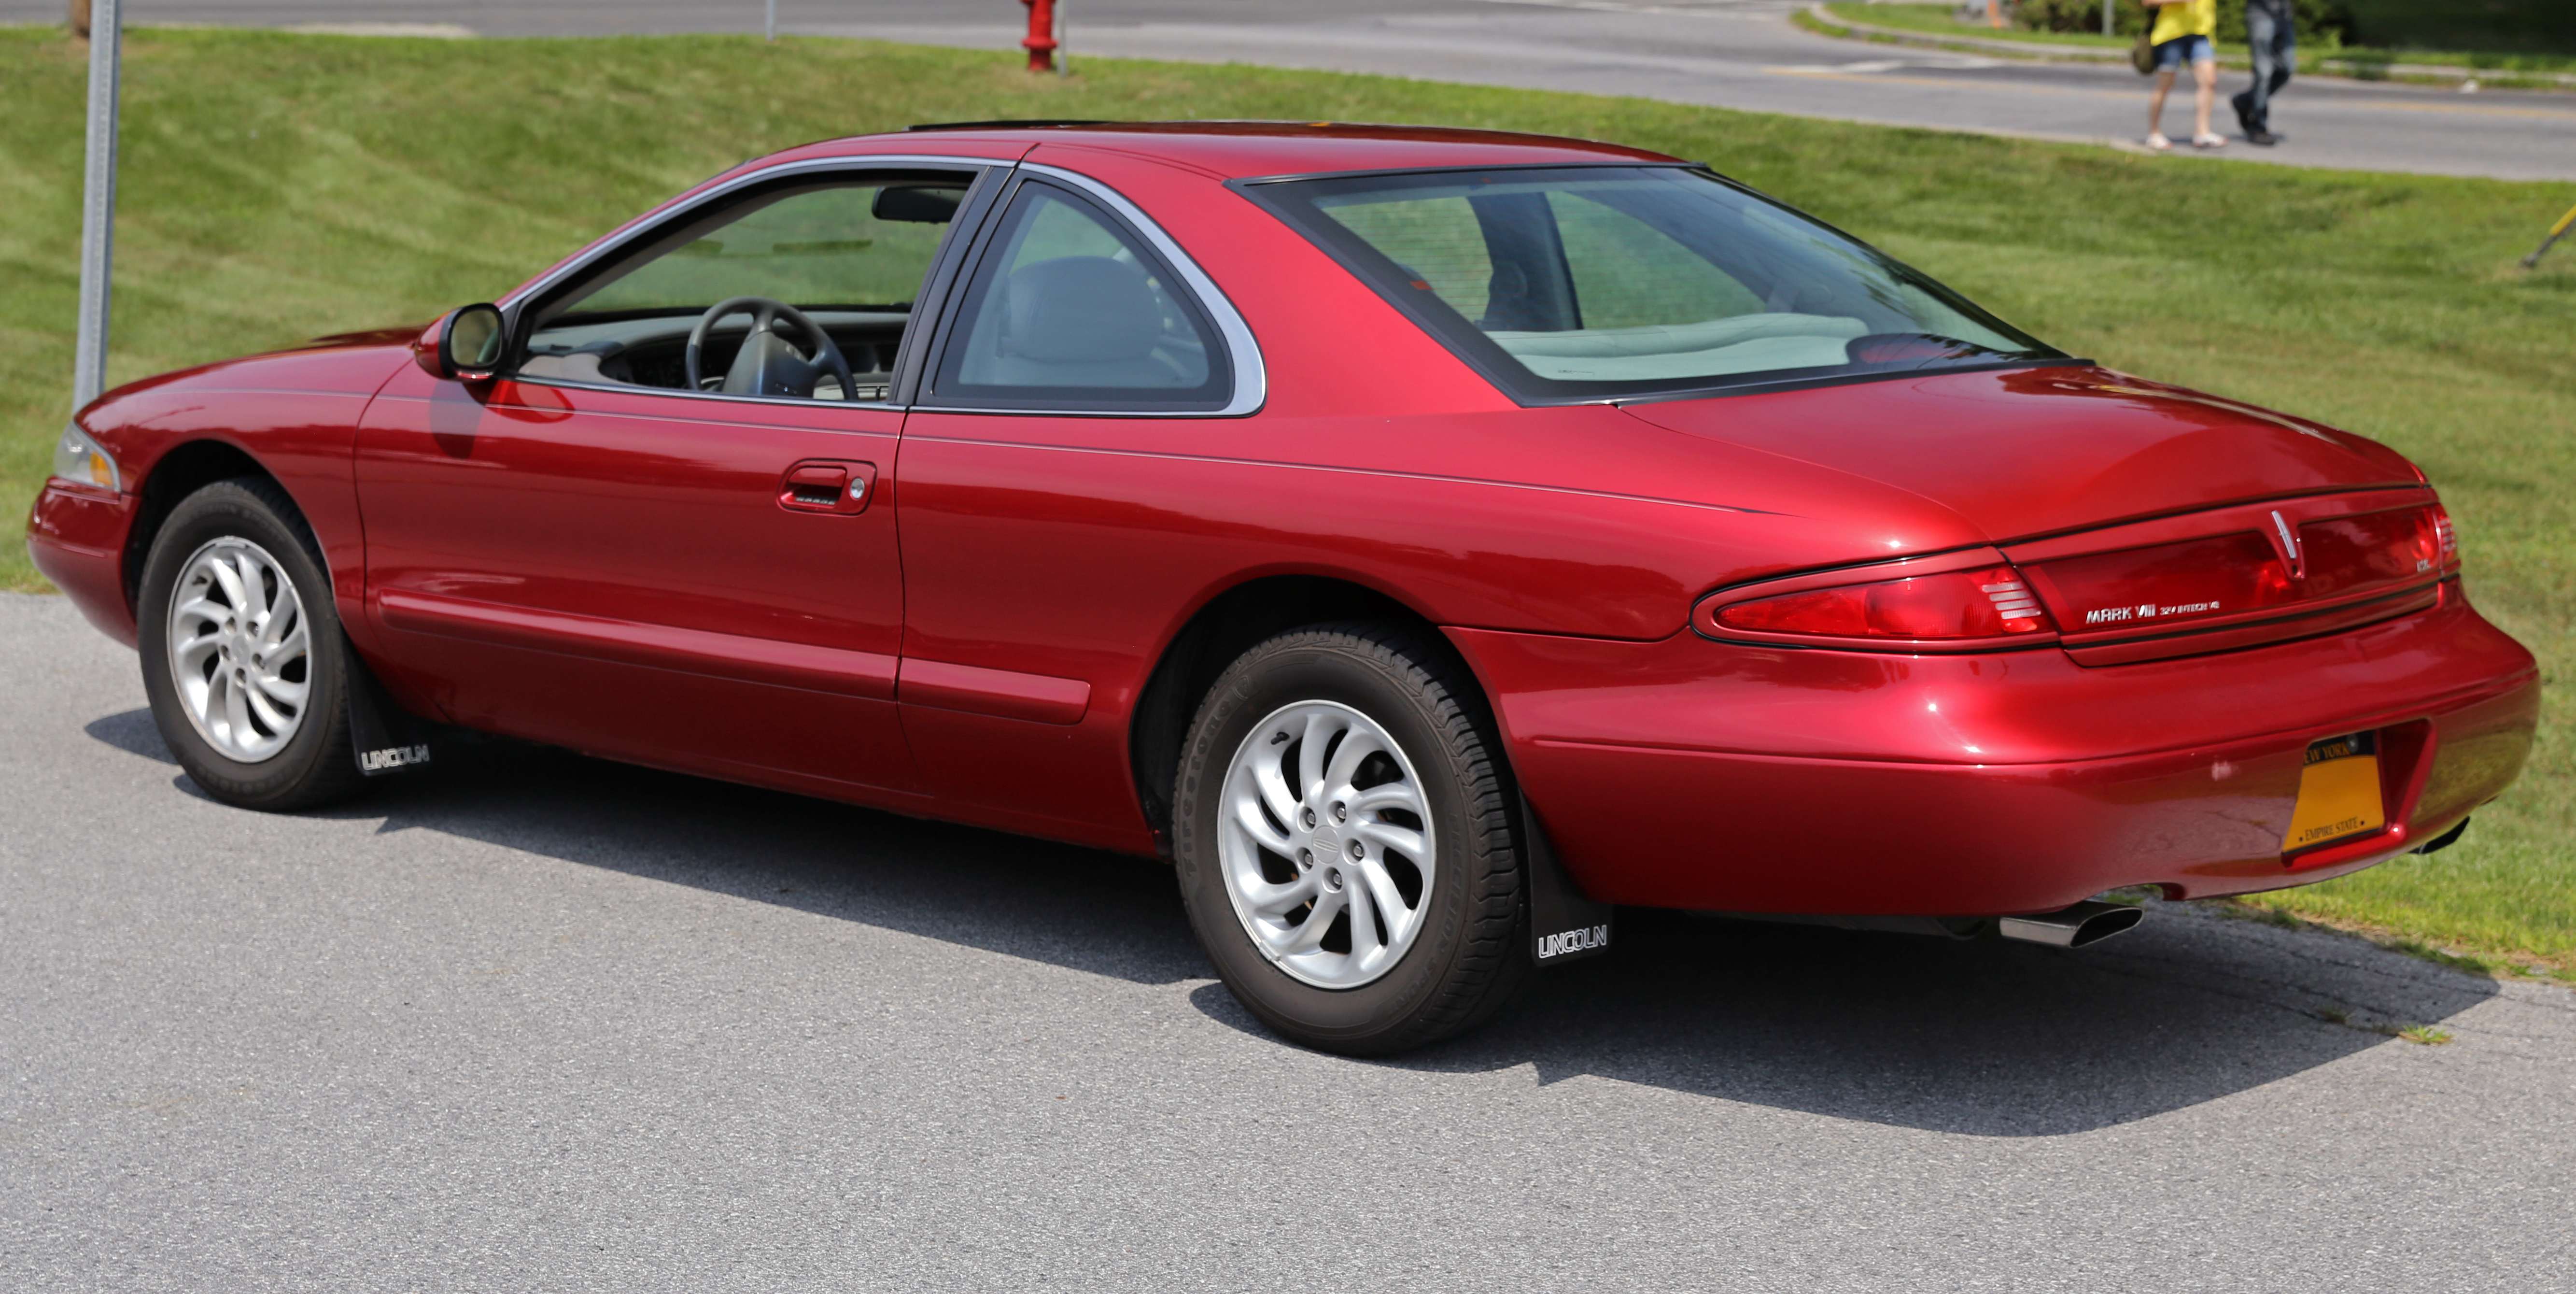 File:1998 Lincoln Mark VIII LSC in red, rear left.jpg - Wikimedia Commons